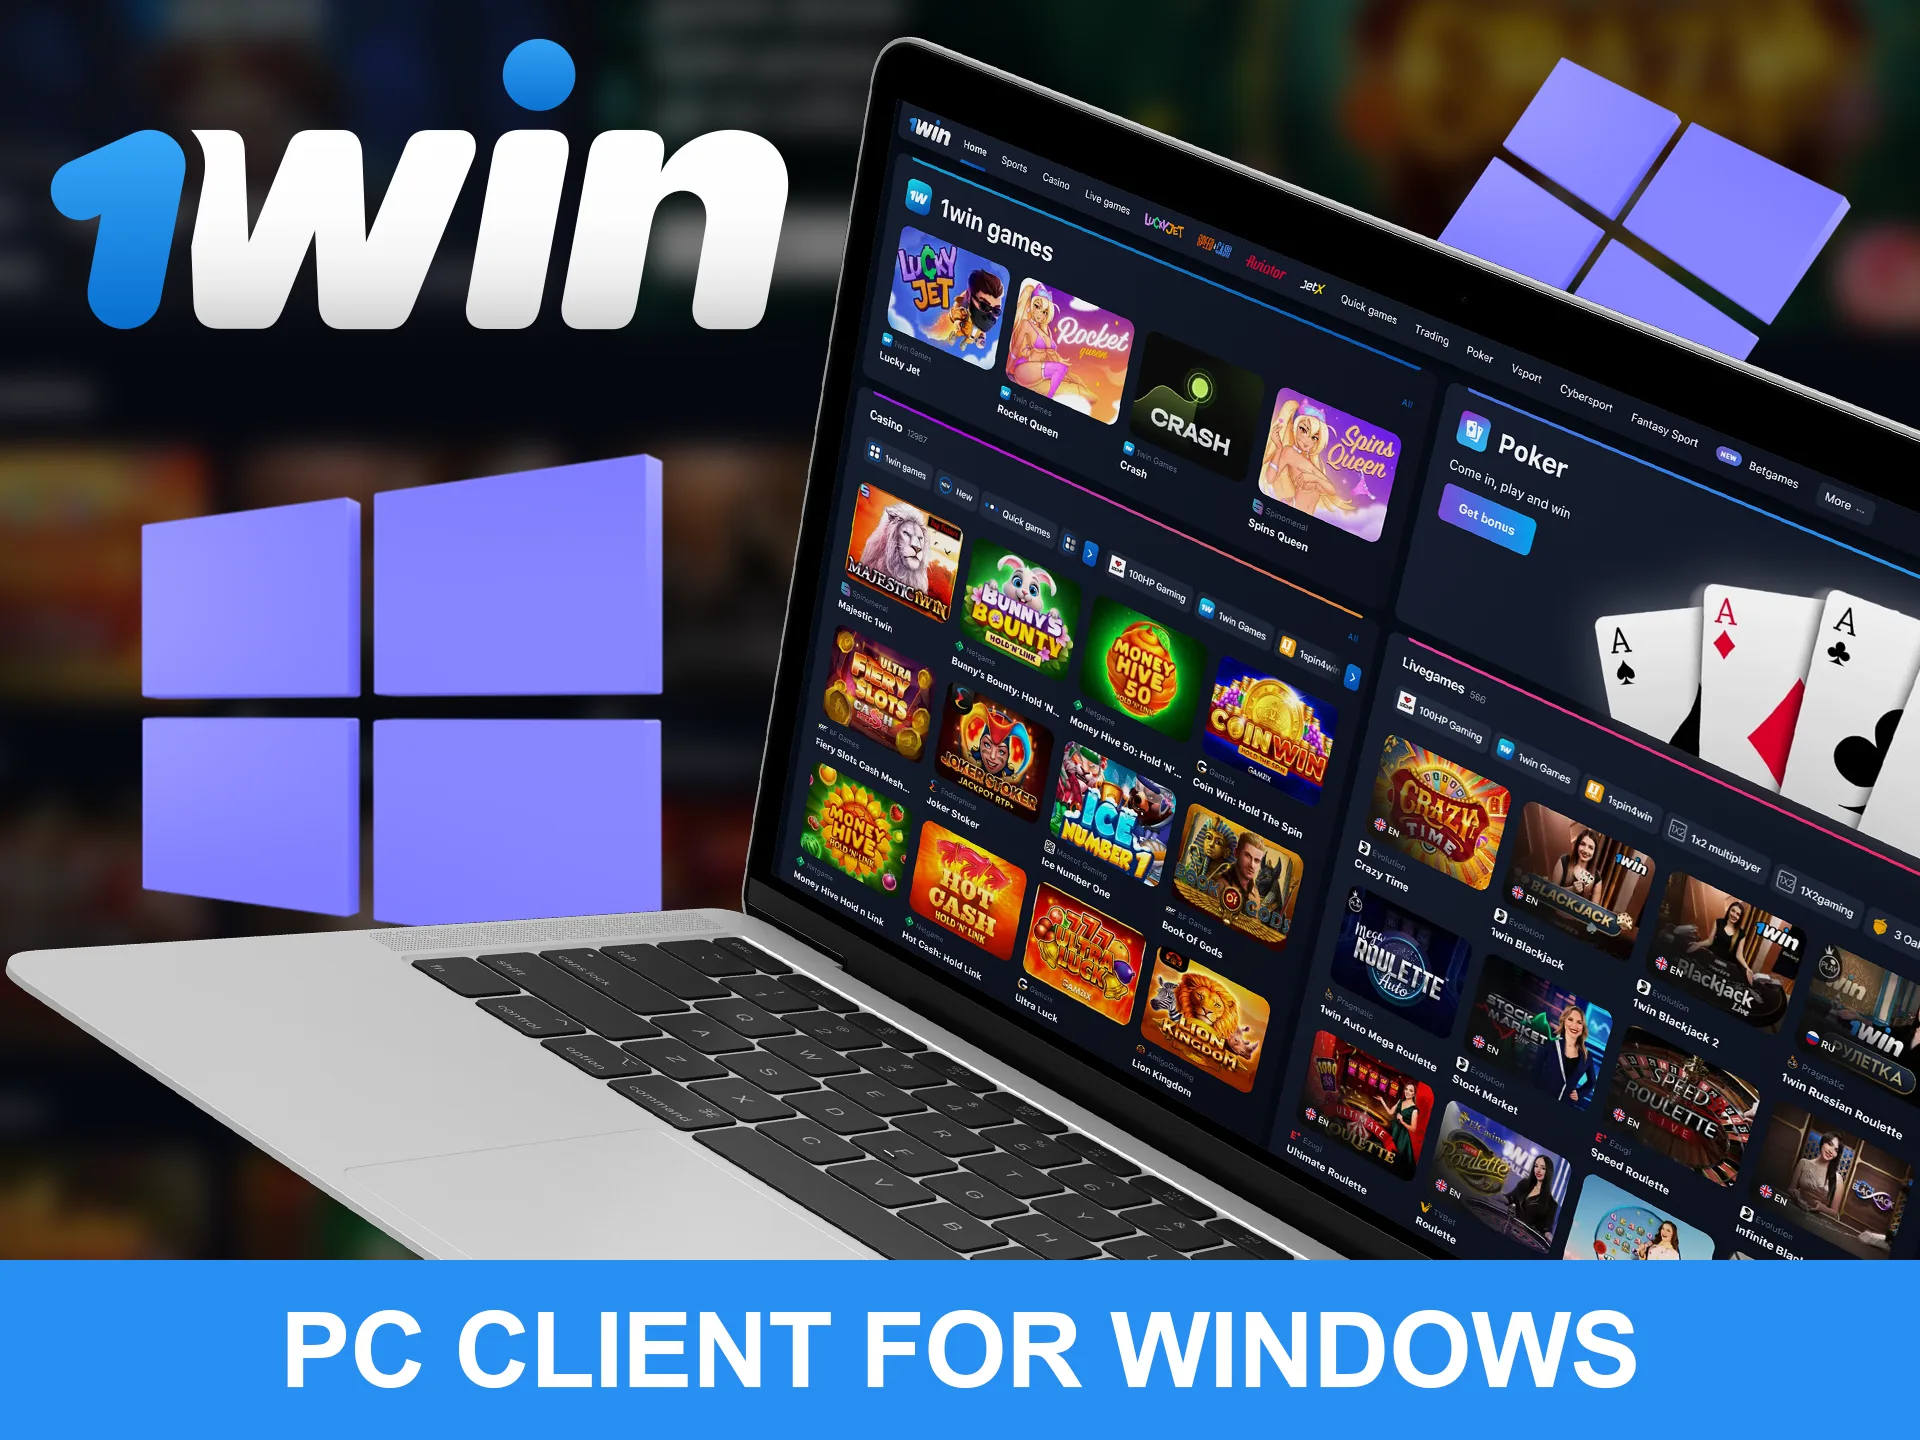 Install the 1win application for Windows on your computer.